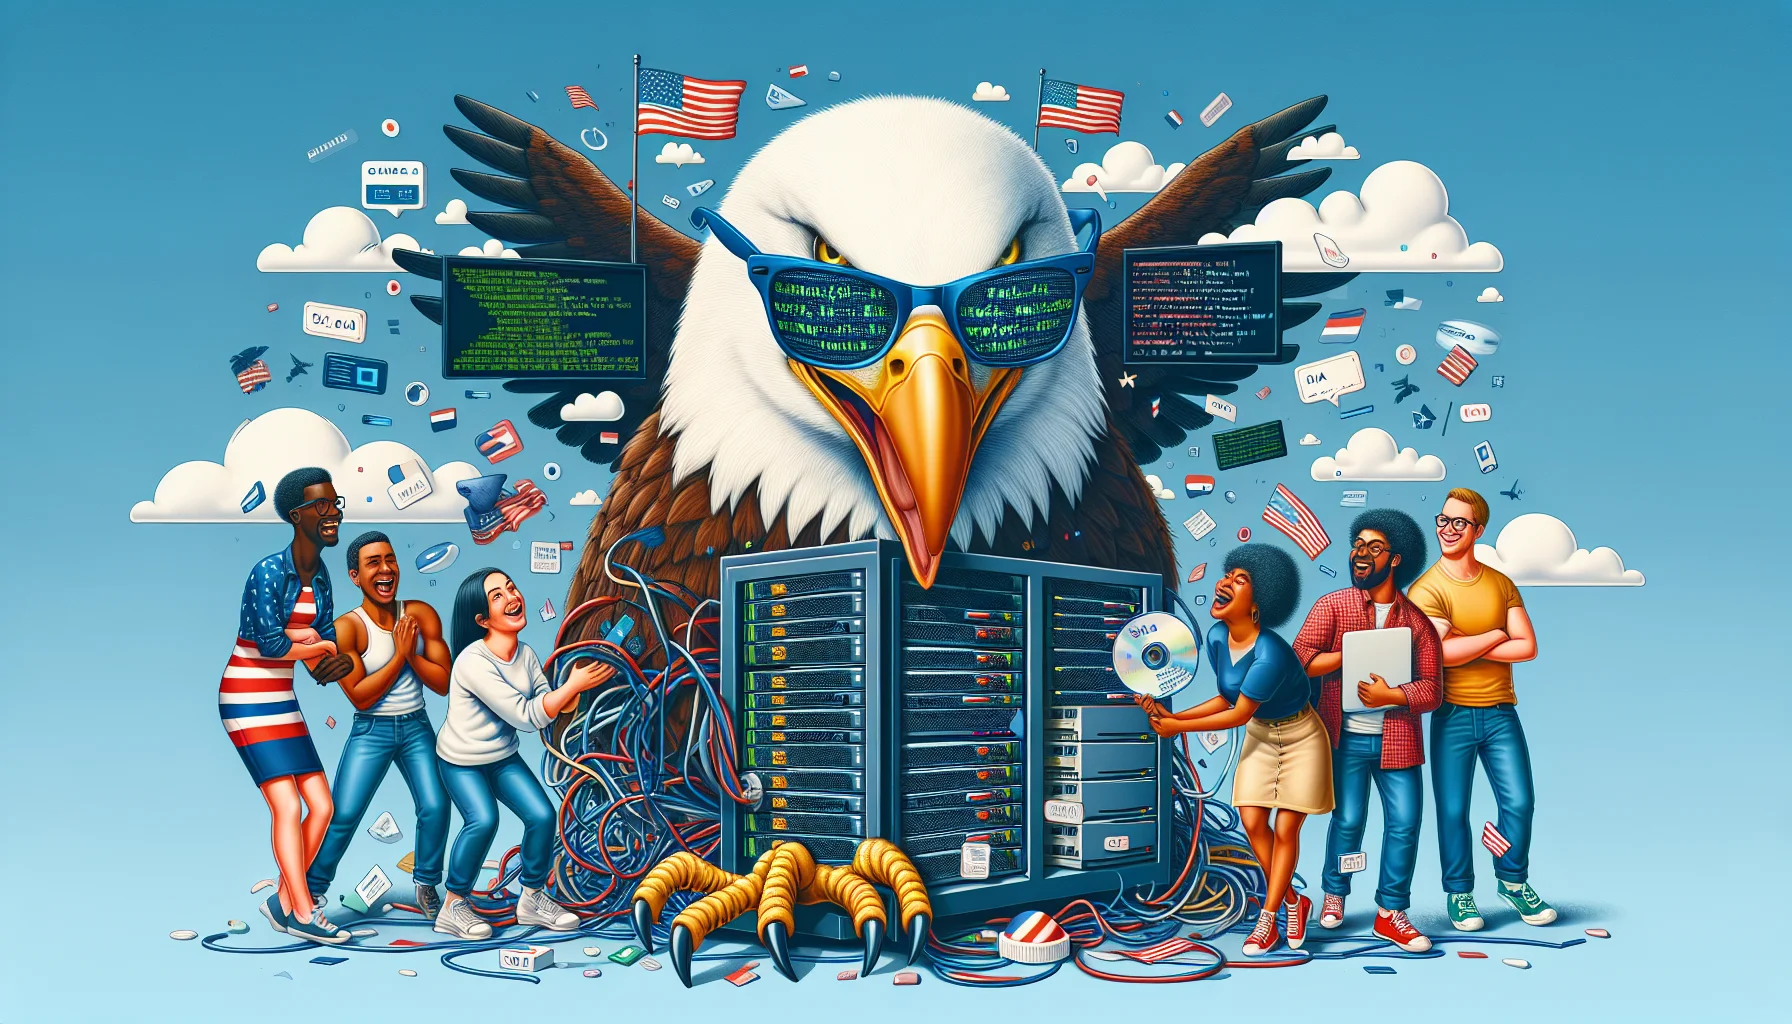 Create a whimsical and enthralling image that tells a comedic story of virtual private server (VPS) hosting in the USA. The image should include symbols representative of the USA and technology, like a bald eagle wearing digital glasses with code reflections, holding a server rack on its talons. A group of diverse people, such as a Black female network engineer, a Hispanic male web developer, a Middle-Eastern female sysadmin, a Caucasian male UX designer, and a South-Asian female software engineer, should be shown laughing and engaging with the server in a jovial way, emphasizing enthusiasm for web hosting.